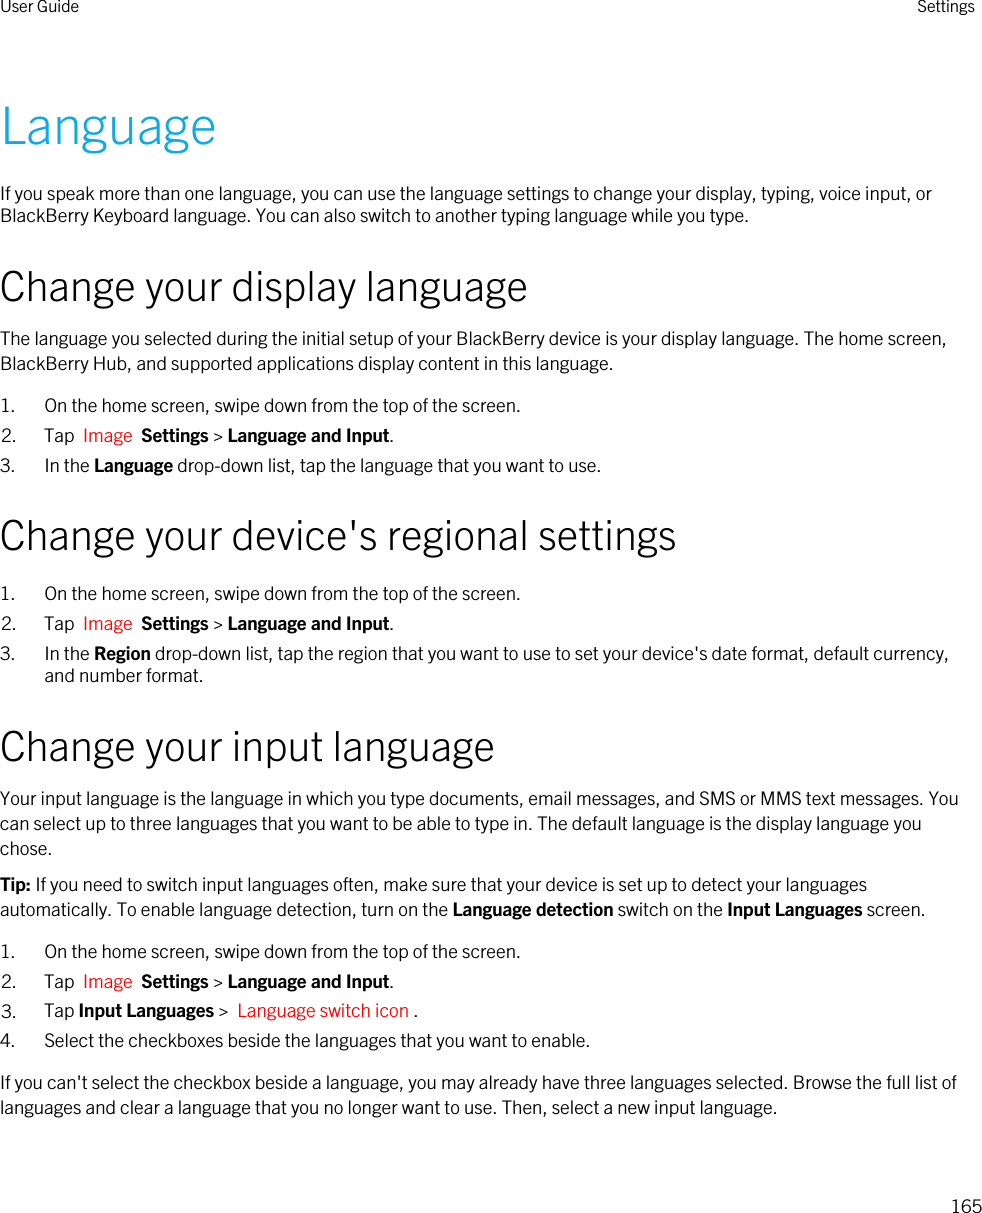 LanguageIf you speak more than one language, you can use the language settings to change your display, typing, voice input, or BlackBerry Keyboard language. You can also switch to another typing language while you type.Change your display languageThe language you selected during the initial setup of your BlackBerry device is your display language. The home screen, BlackBerry Hub, and supported applications display content in this language.1. On the home screen, swipe down from the top of the screen.2. Tap  Image  Settings &gt; Language and Input.3. In the Language drop-down list, tap the language that you want to use.Change your device&apos;s regional settings1. On the home screen, swipe down from the top of the screen.2. Tap  Image  Settings &gt; Language and Input.3. In the Region drop-down list, tap the region that you want to use to set your device&apos;s date format, default currency, and number format.Change your input languageYour input language is the language in which you type documents, email messages, and SMS or MMS text messages. You can select up to three languages that you want to be able to type in. The default language is the display language you chose.Tip: If you need to switch input languages often, make sure that your device is set up to detect your languages automatically. To enable language detection, turn on the Language detection switch on the Input Languages screen.1. On the home screen, swipe down from the top of the screen.2. Tap  Image  Settings &gt; Language and Input. 3. Tap Input Languages &gt;  Language switch icon . 4. Select the checkboxes beside the languages that you want to enable.If you can&apos;t select the checkbox beside a language, you may already have three languages selected. Browse the full list of languages and clear a language that you no longer want to use. Then, select a new input language.User Guide Settings165